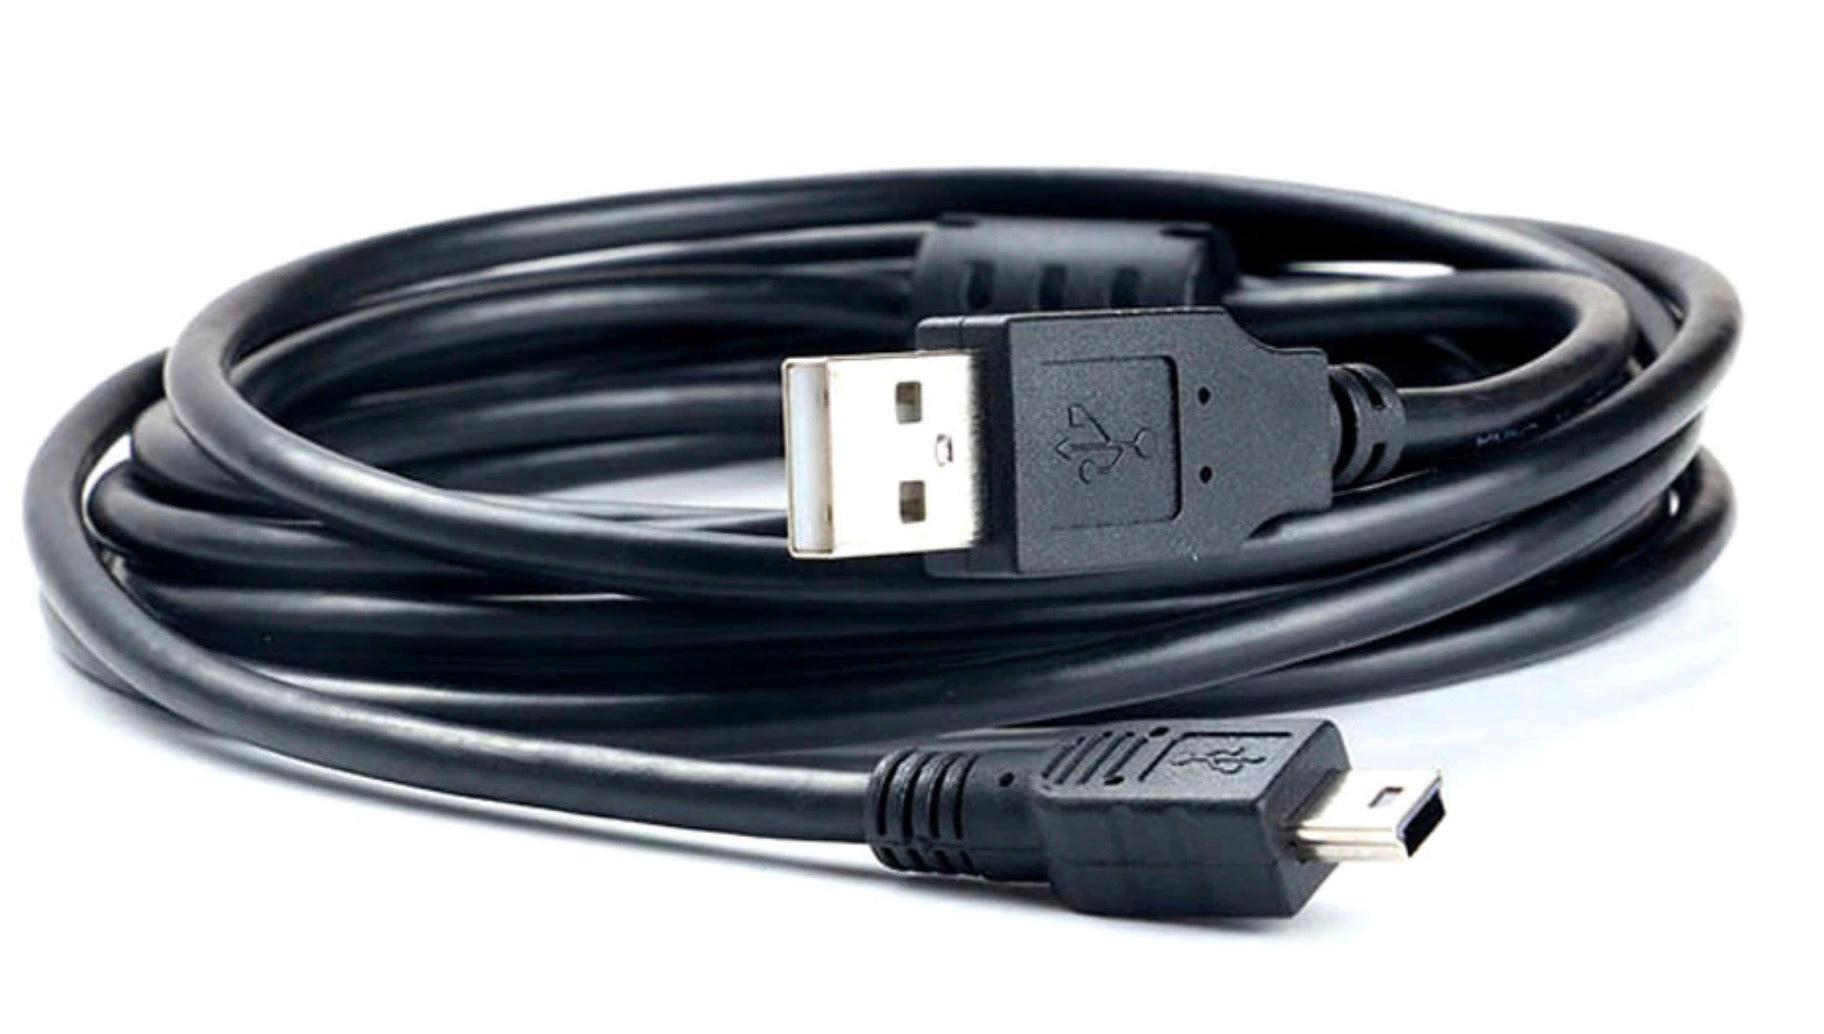 USB 2.0 Type A Male to Mini USB 5 Pin Male Data Charging Cable 1.8m